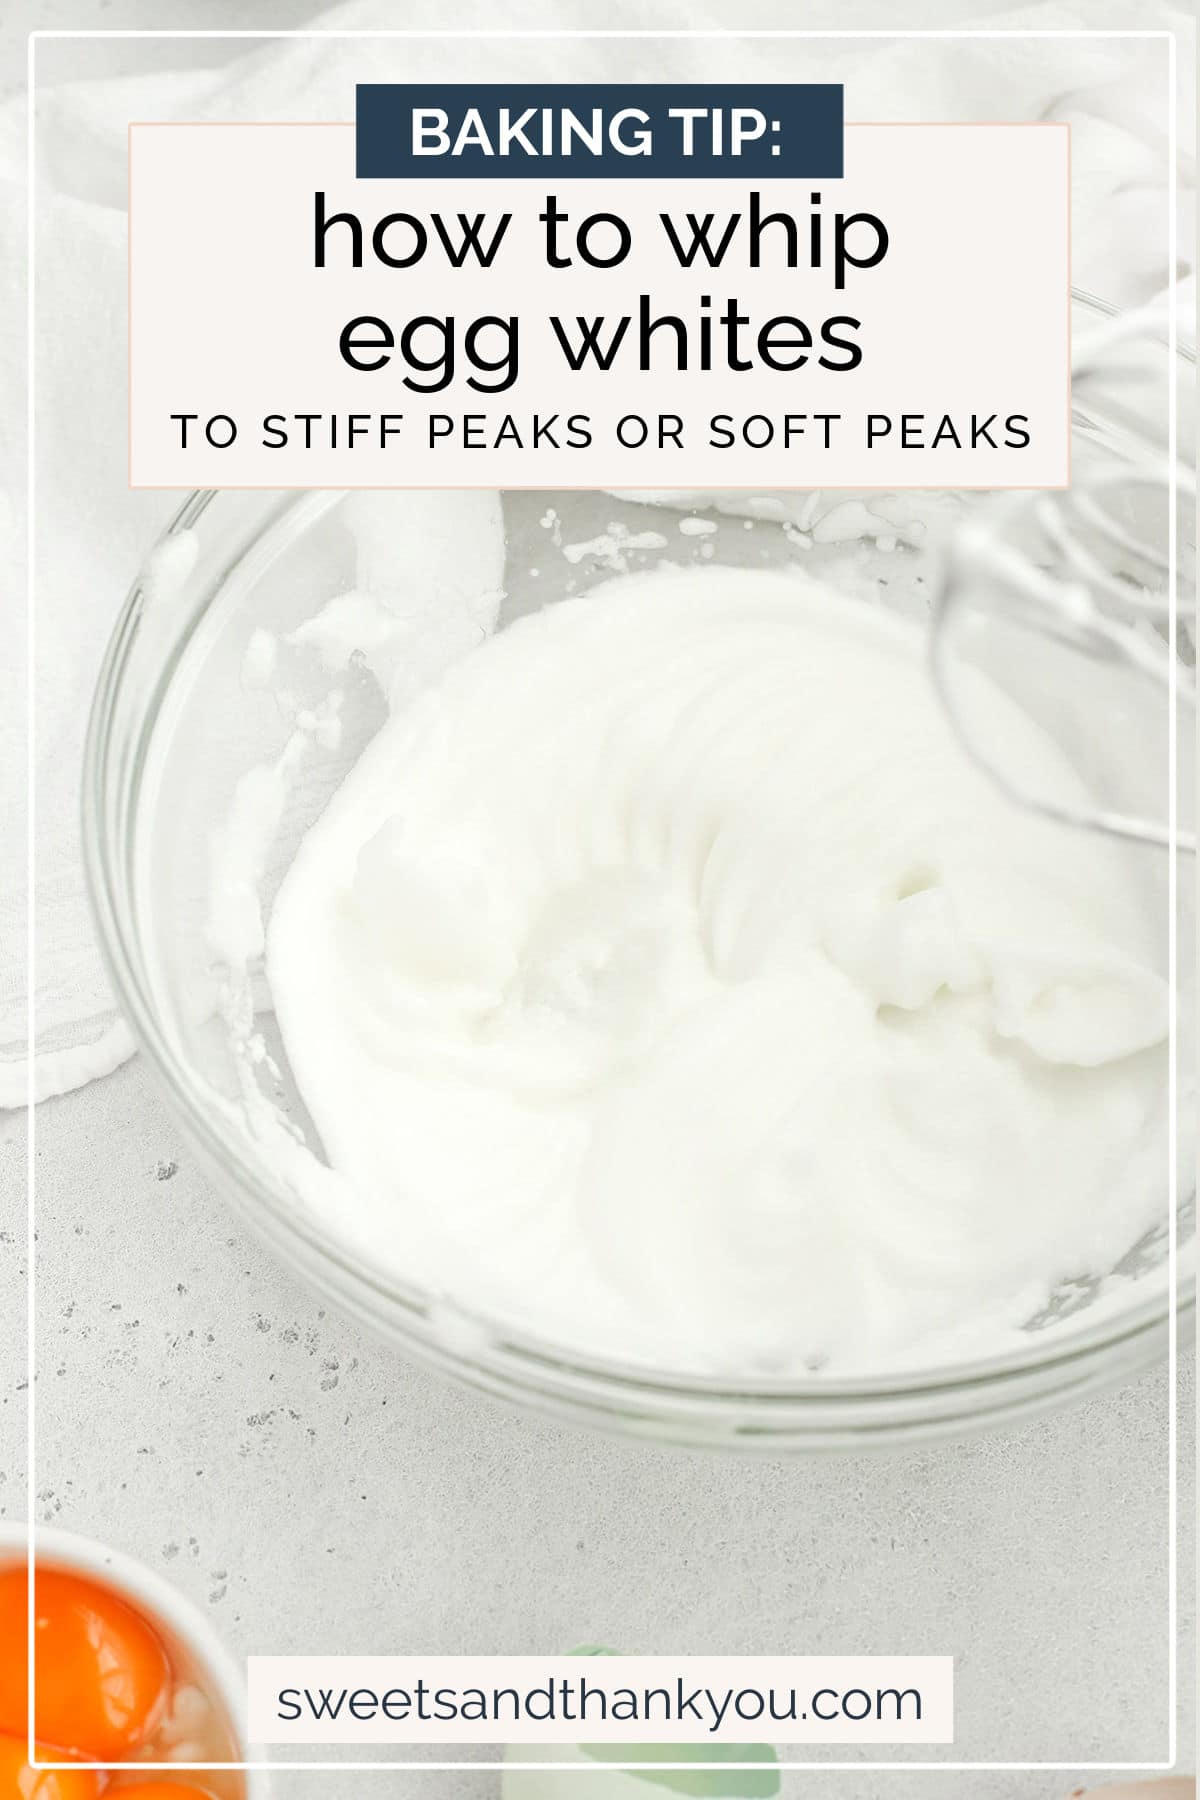 How To Whip Egg Whites - Learn how to whip egg whites into stiff peaks or soft peaks for all your favorite recipes. Don't miss our tips! // how to whip egg whites to stiff peaks // egg whites stiff peaks // egg whites soft peaks // why won't my eggs whip // whipping egg whites // soft peaks vs. firm peaks // soft peaks vs firm peaks // how to whip an egg white // how to use whipped egg whites // how long does it take to whip egg whites